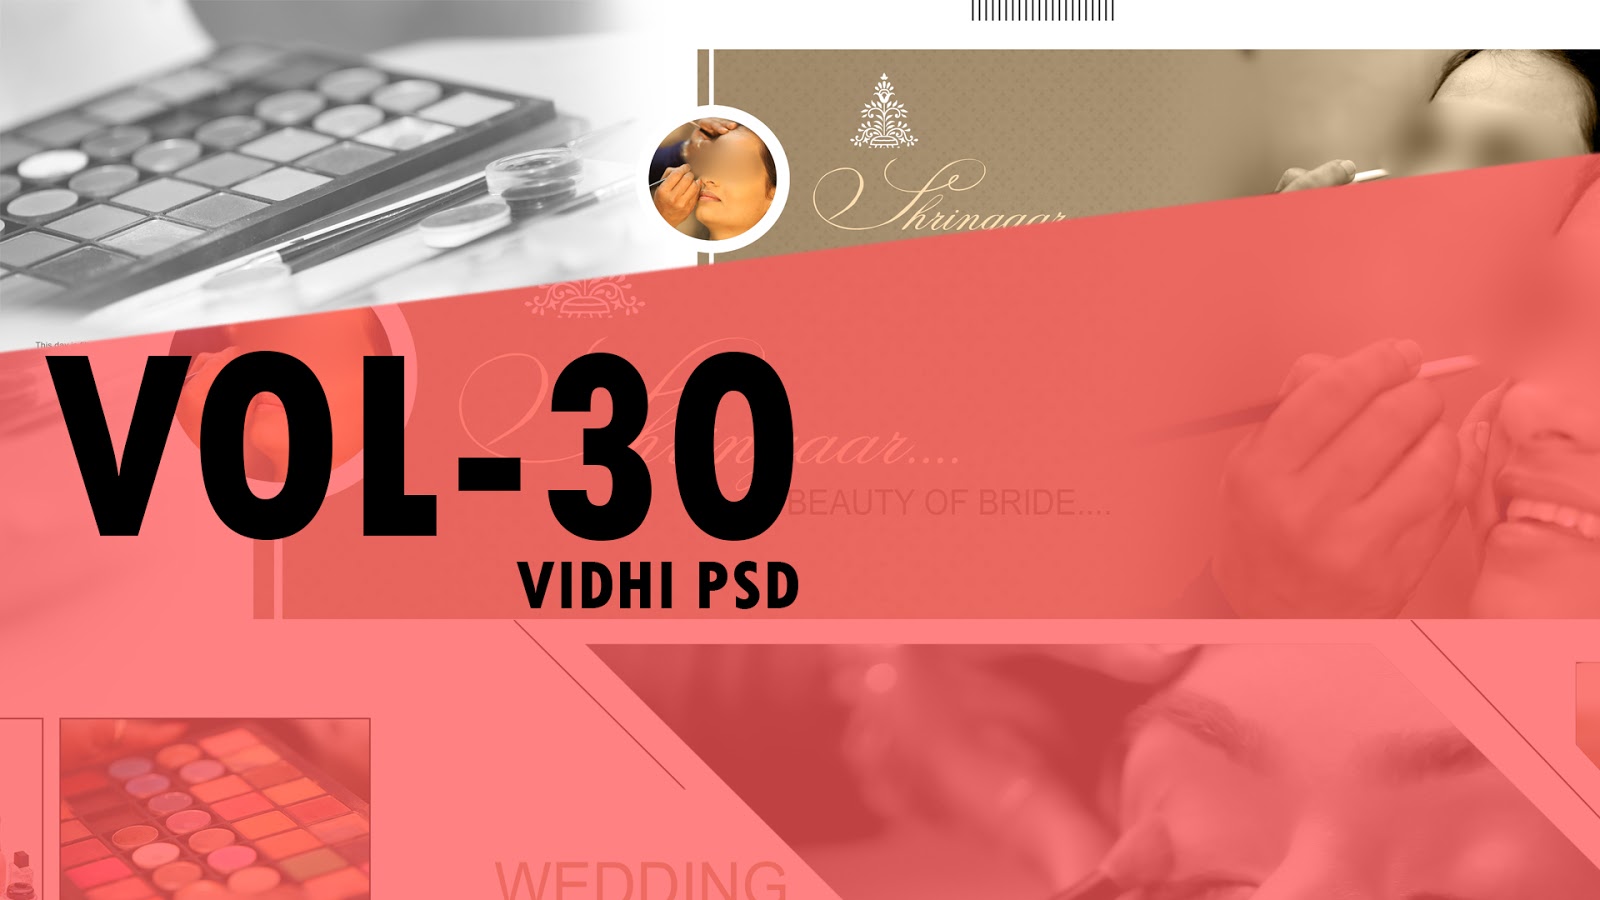 Download Indian Wedding 12x36 Dm Psd Template Vol 30 Free Download PSD Mockup Templates